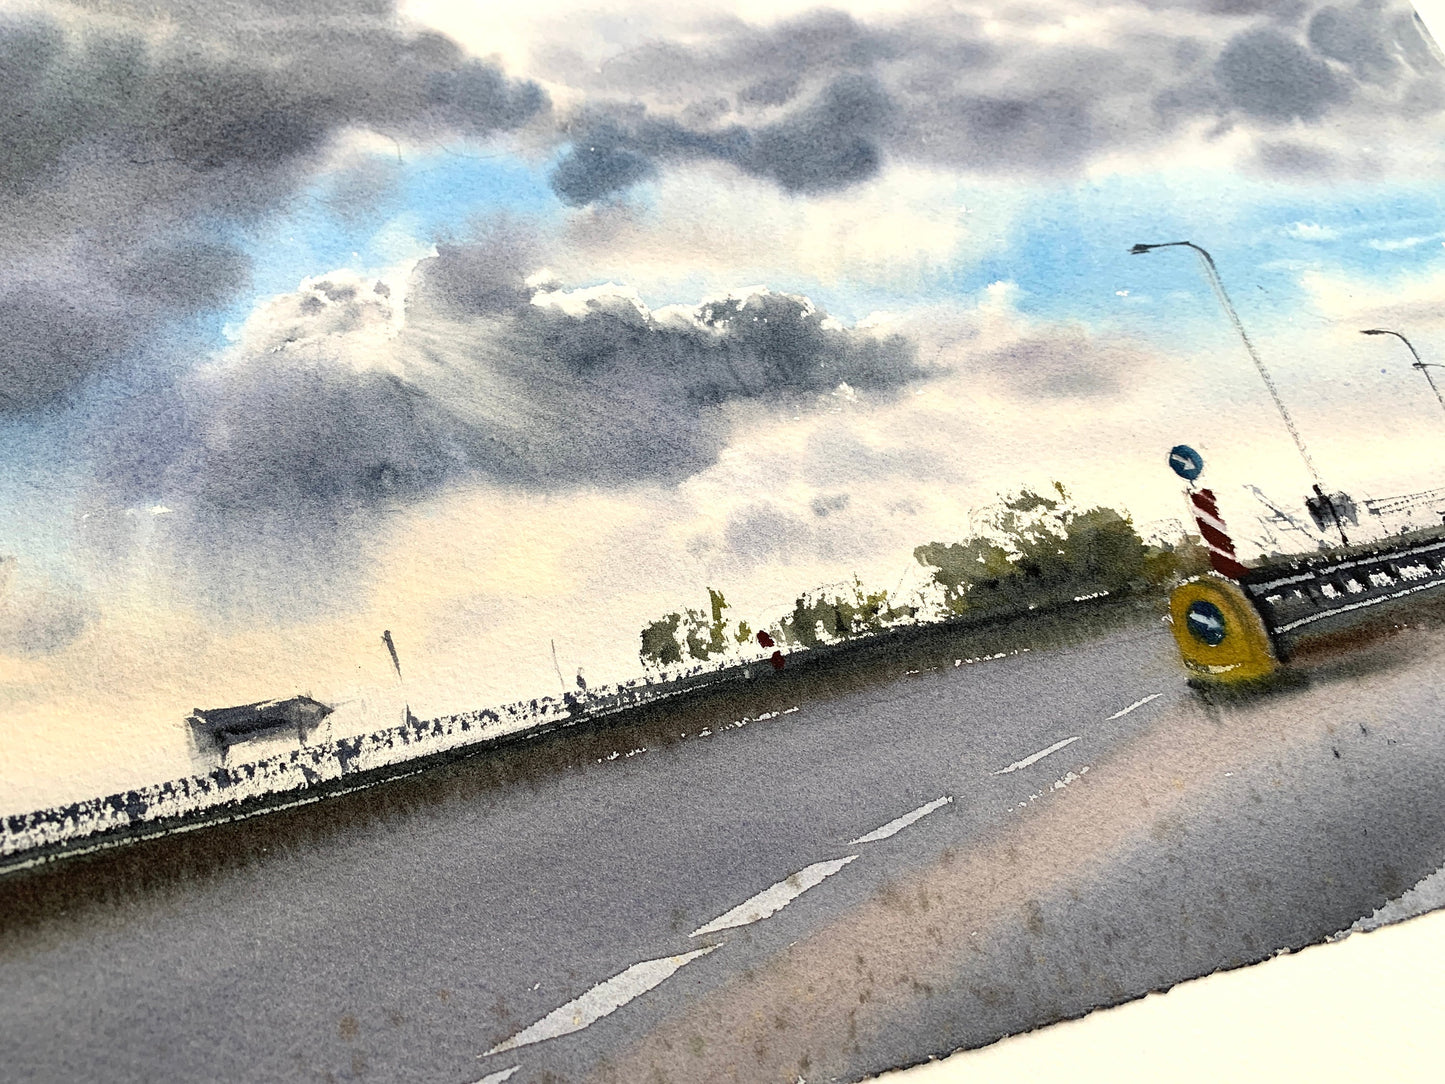 Landscape Original Watercolor Painting, Road Traffic, Summer Cloud Highway, Way Wall Decor, Colorful Impressionist Art